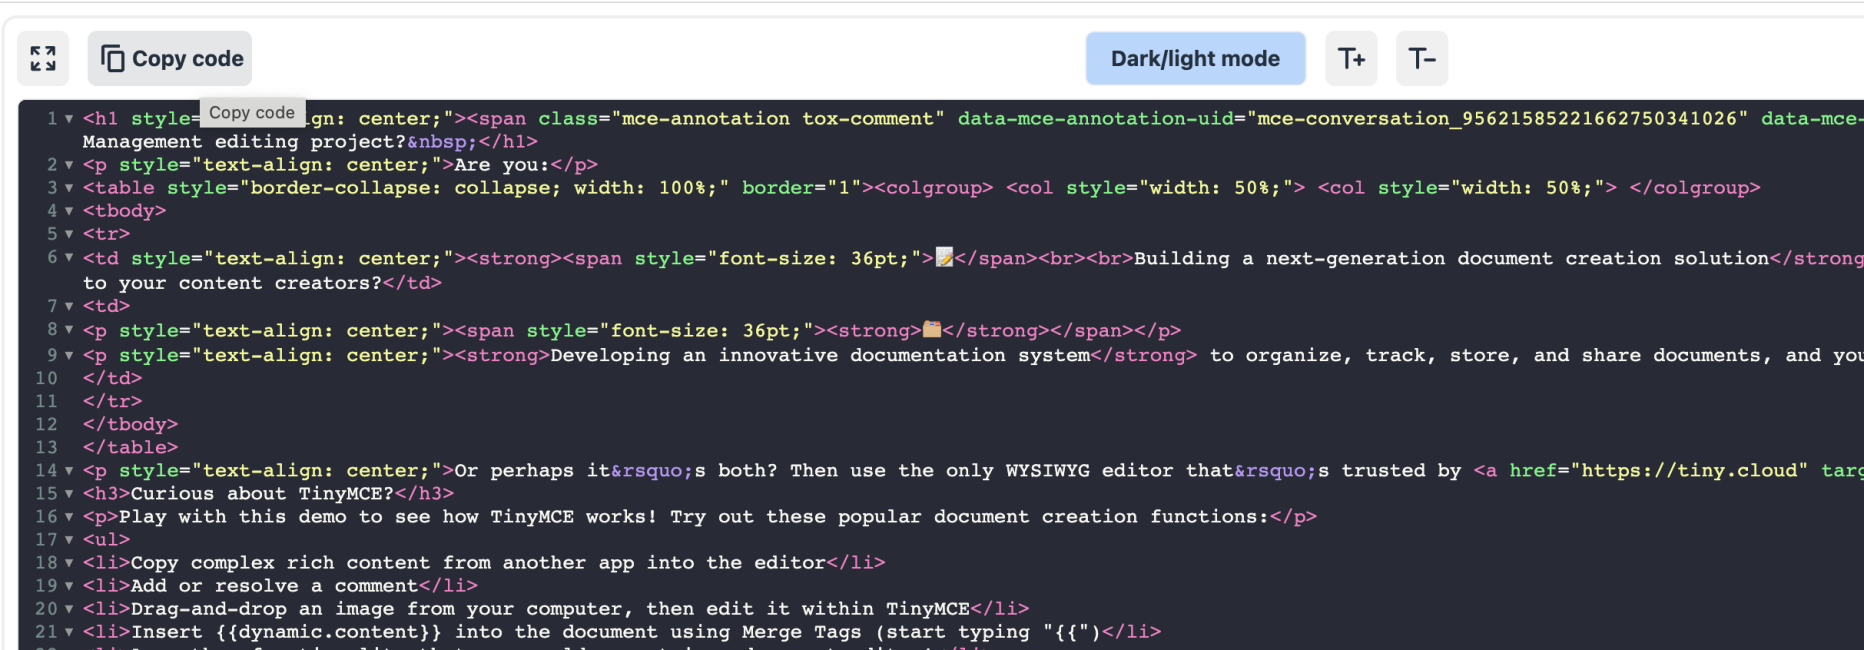 The dark mode view active in the source code editor